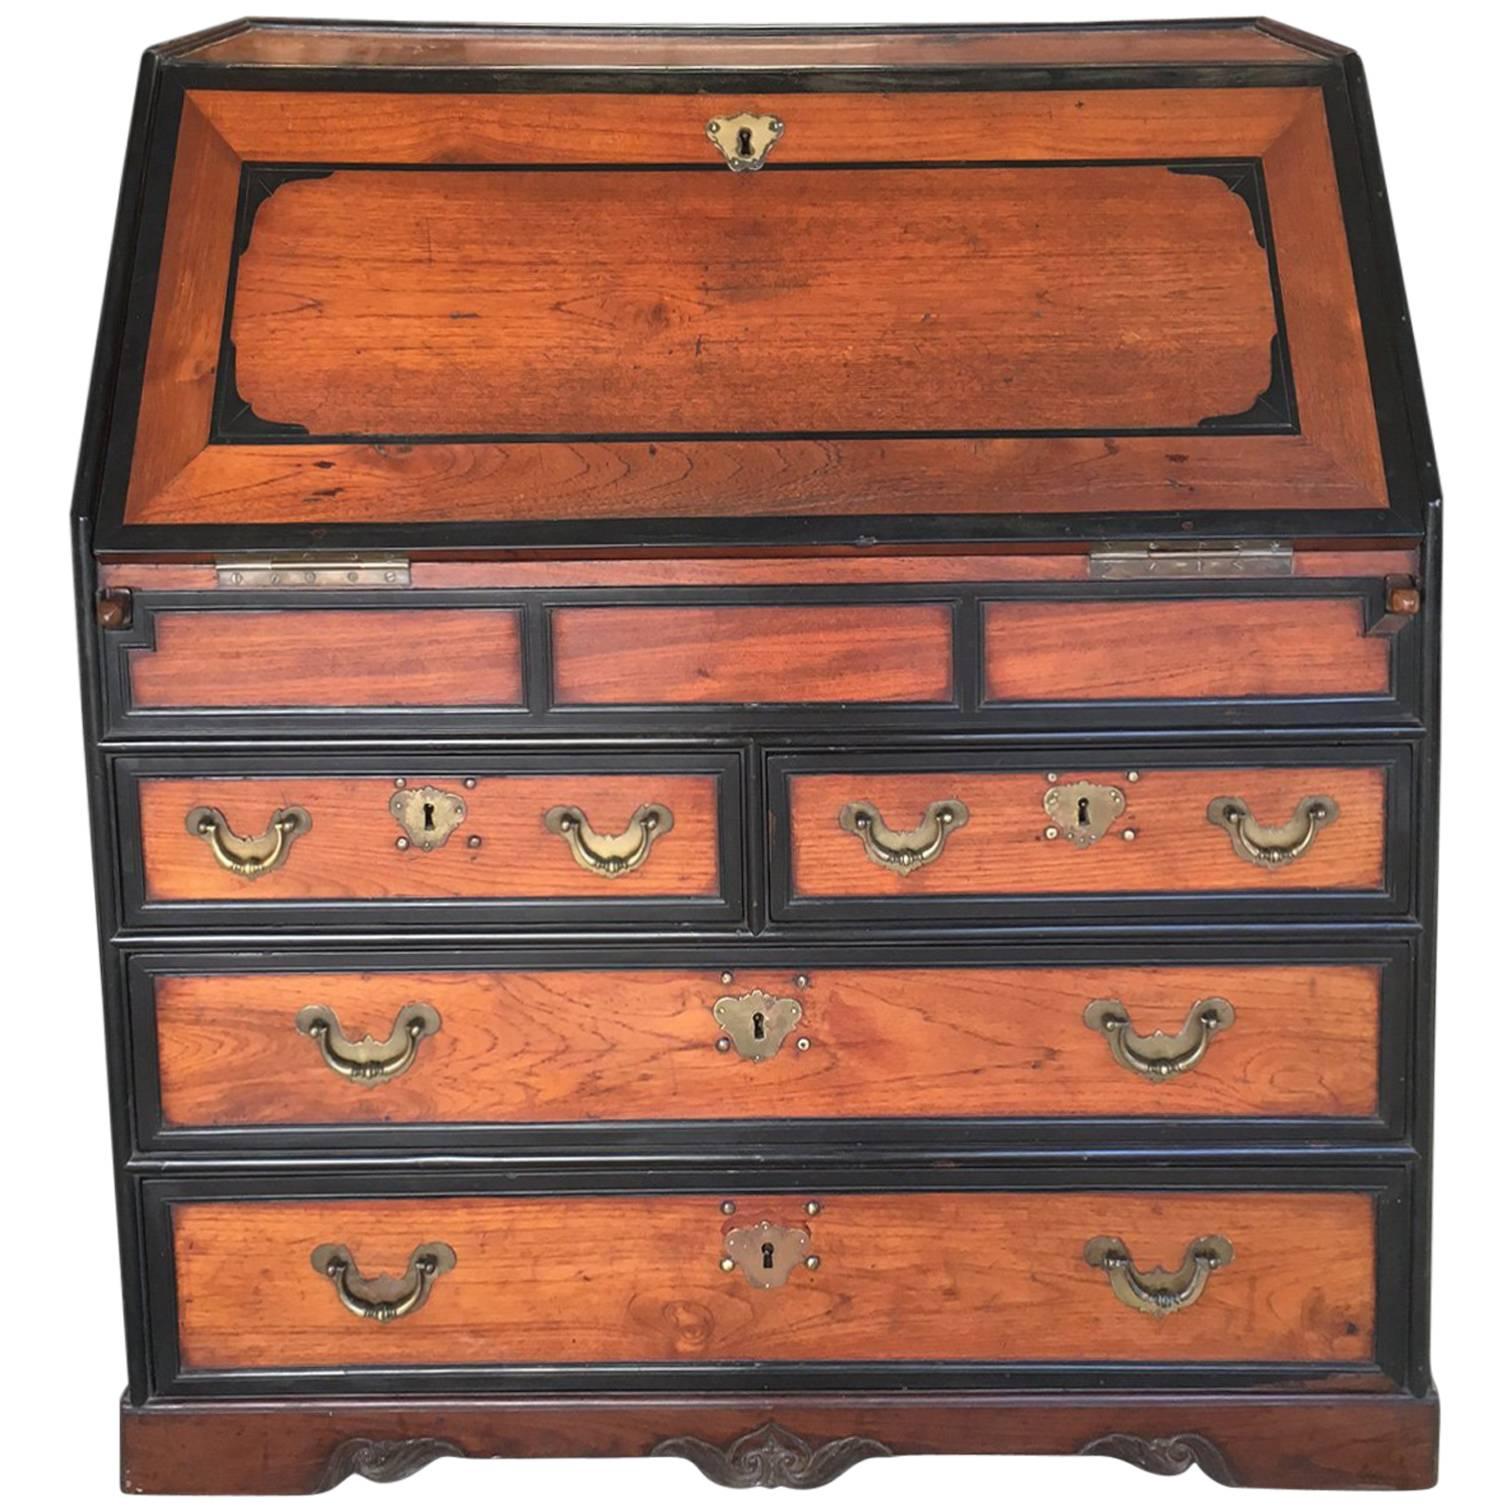 Very Fine Quality Anglo-Indian Secretaire Desk For Sale